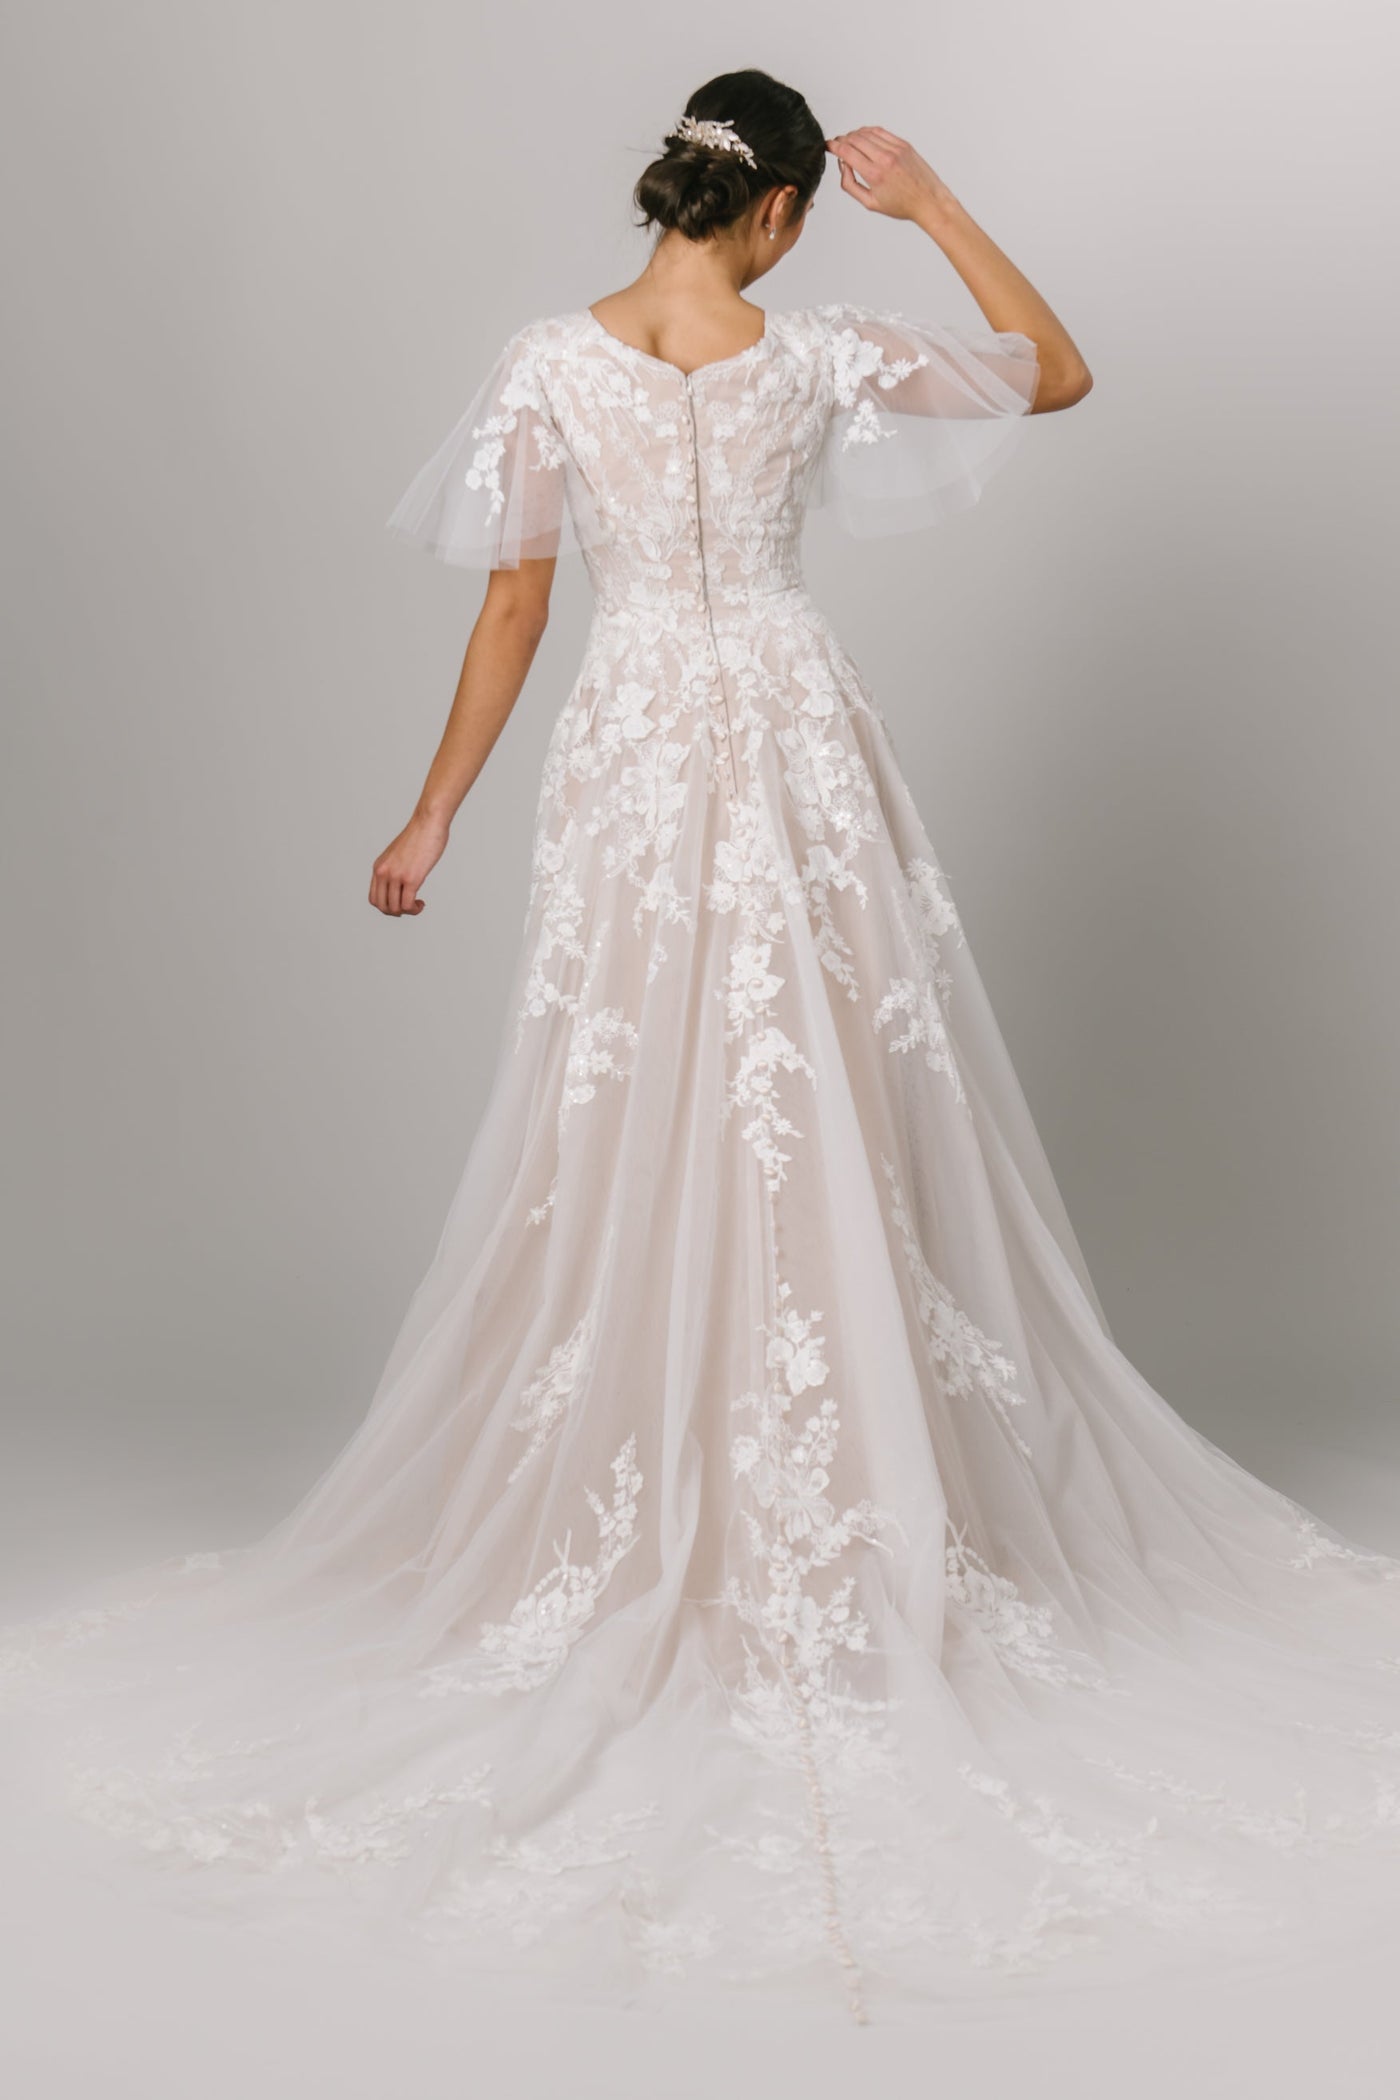 This Modest Dress features flutter sleeves, 3D lace appliques and an a soft ballgown fit. - Modest Wedding Dress - Modest Dresses - LDS Wedding Dress - LatterDayBride